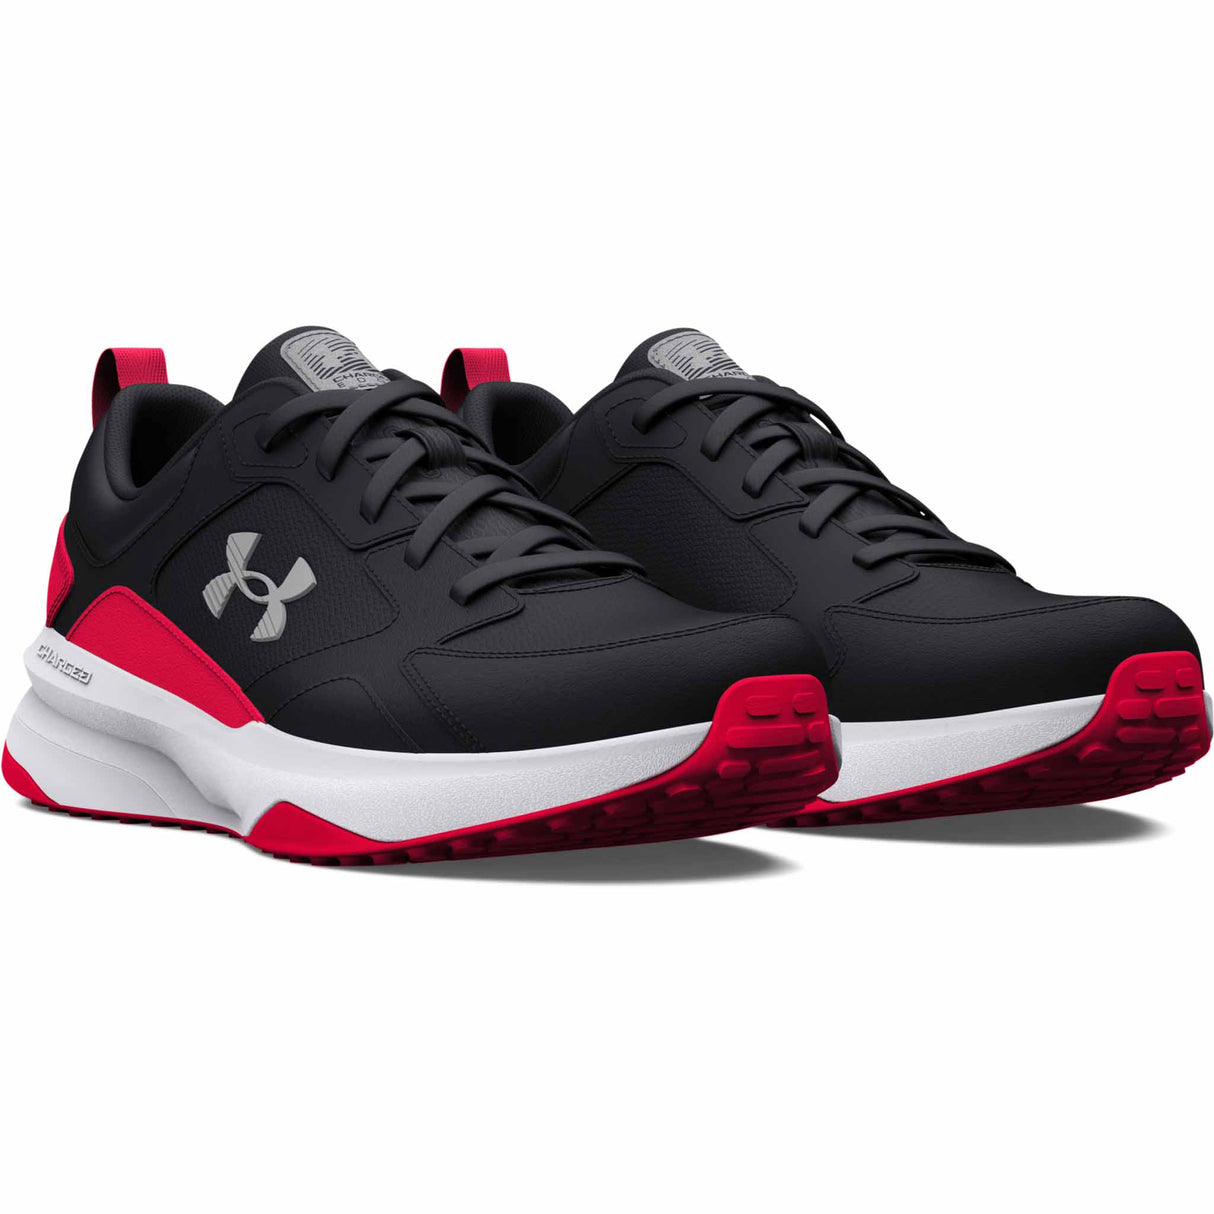 Under Armour Charged Edge chaussures d'entrainement sport homme - Black / Red